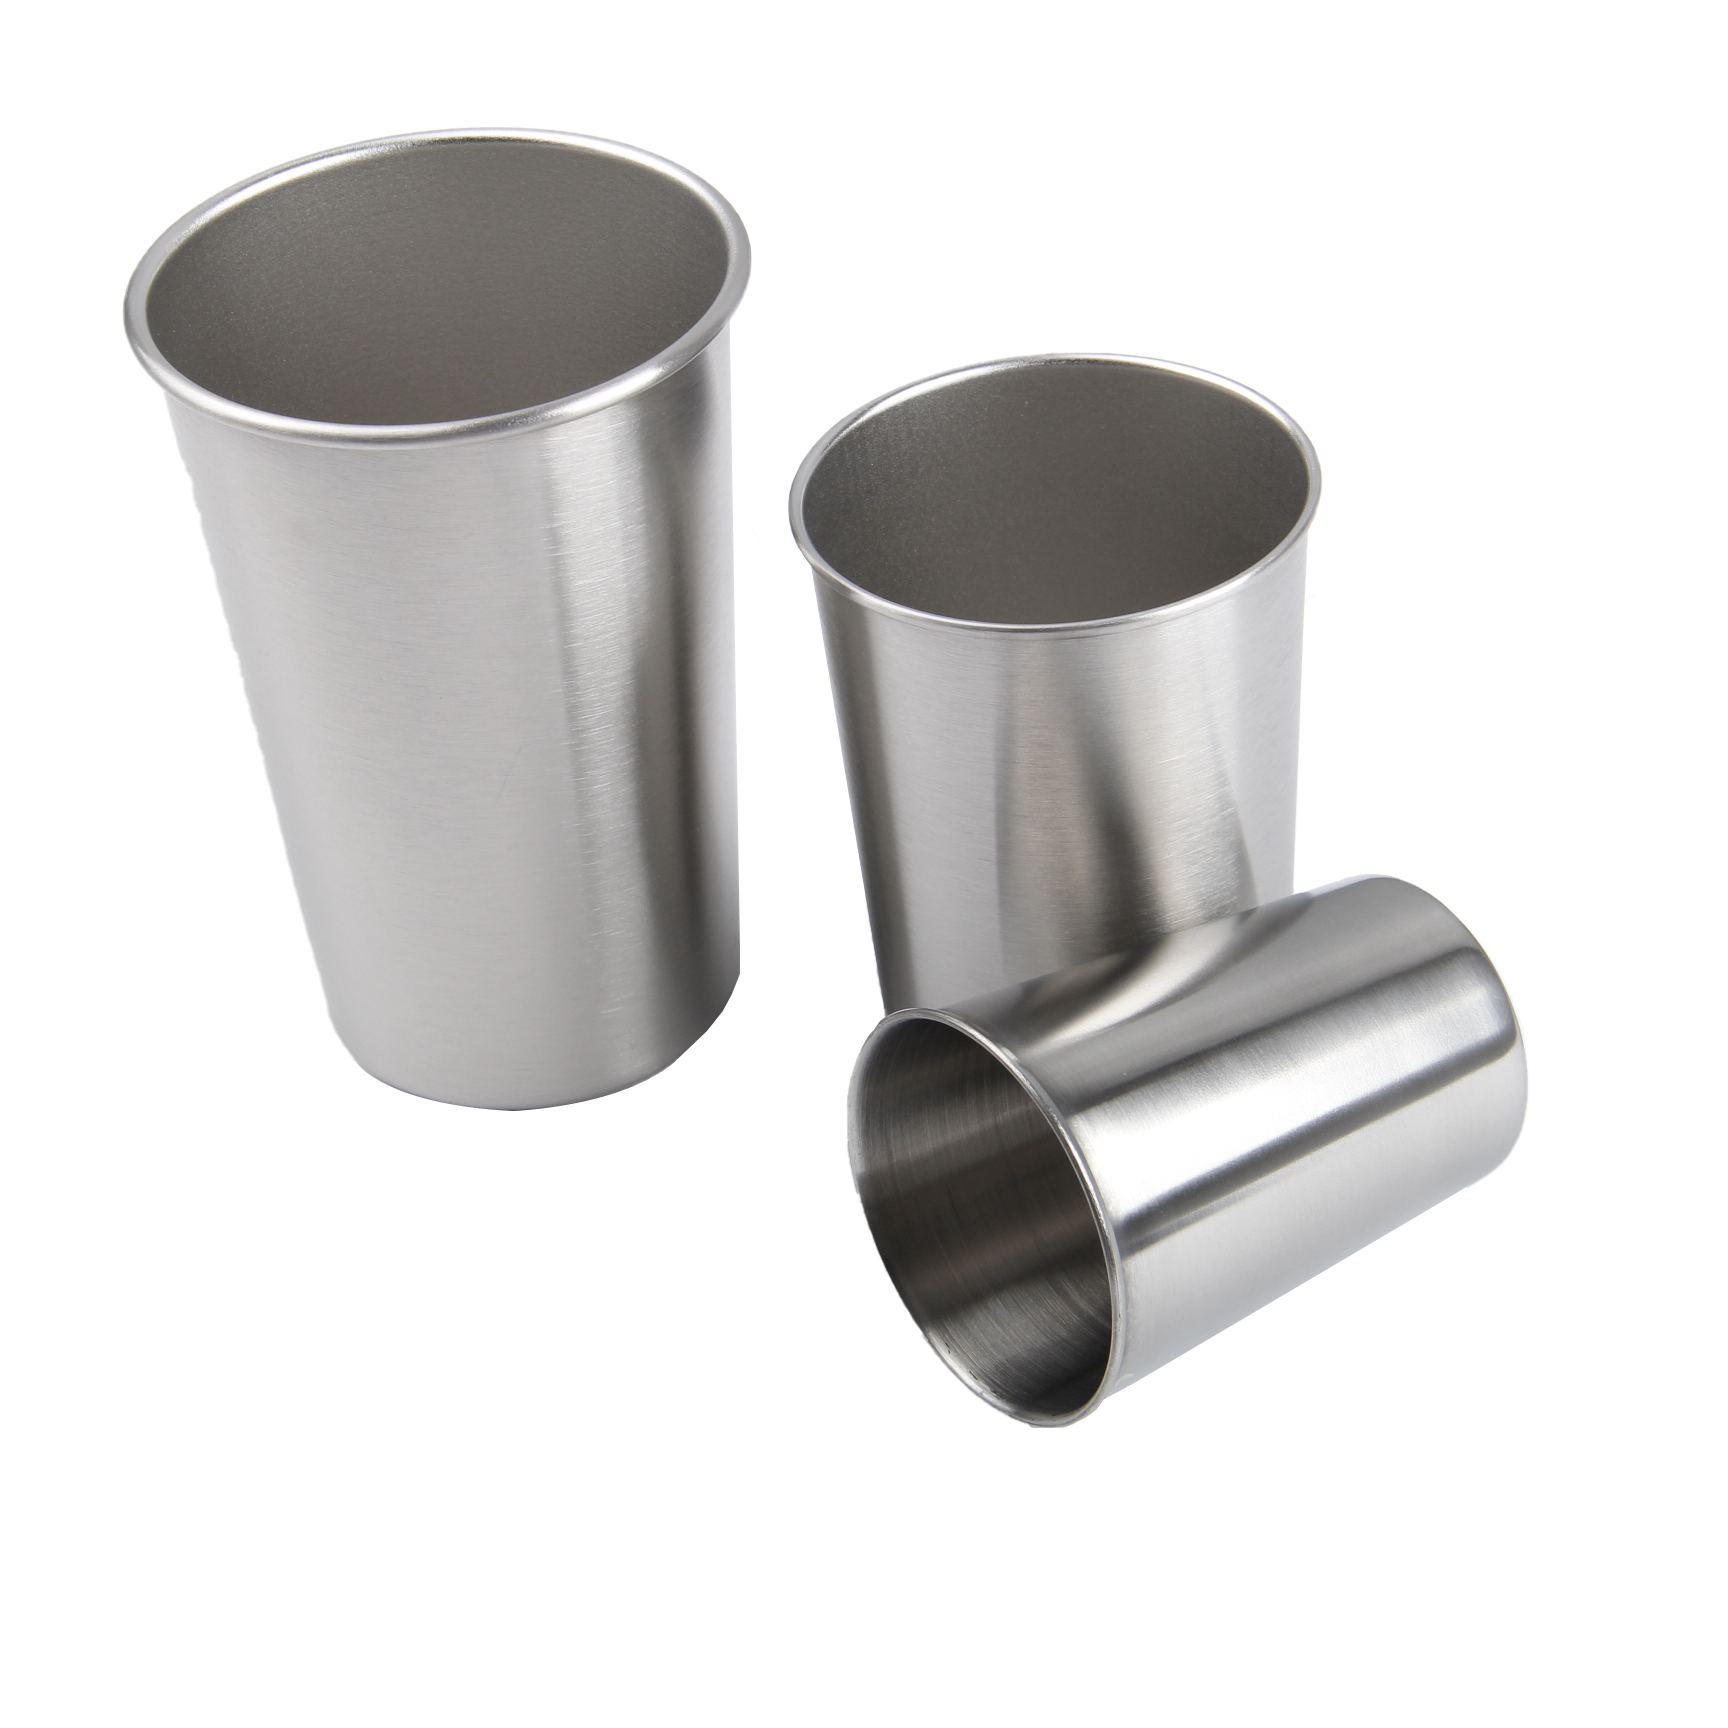 6 oz. Stainless Steel Pint Drinking Cup2